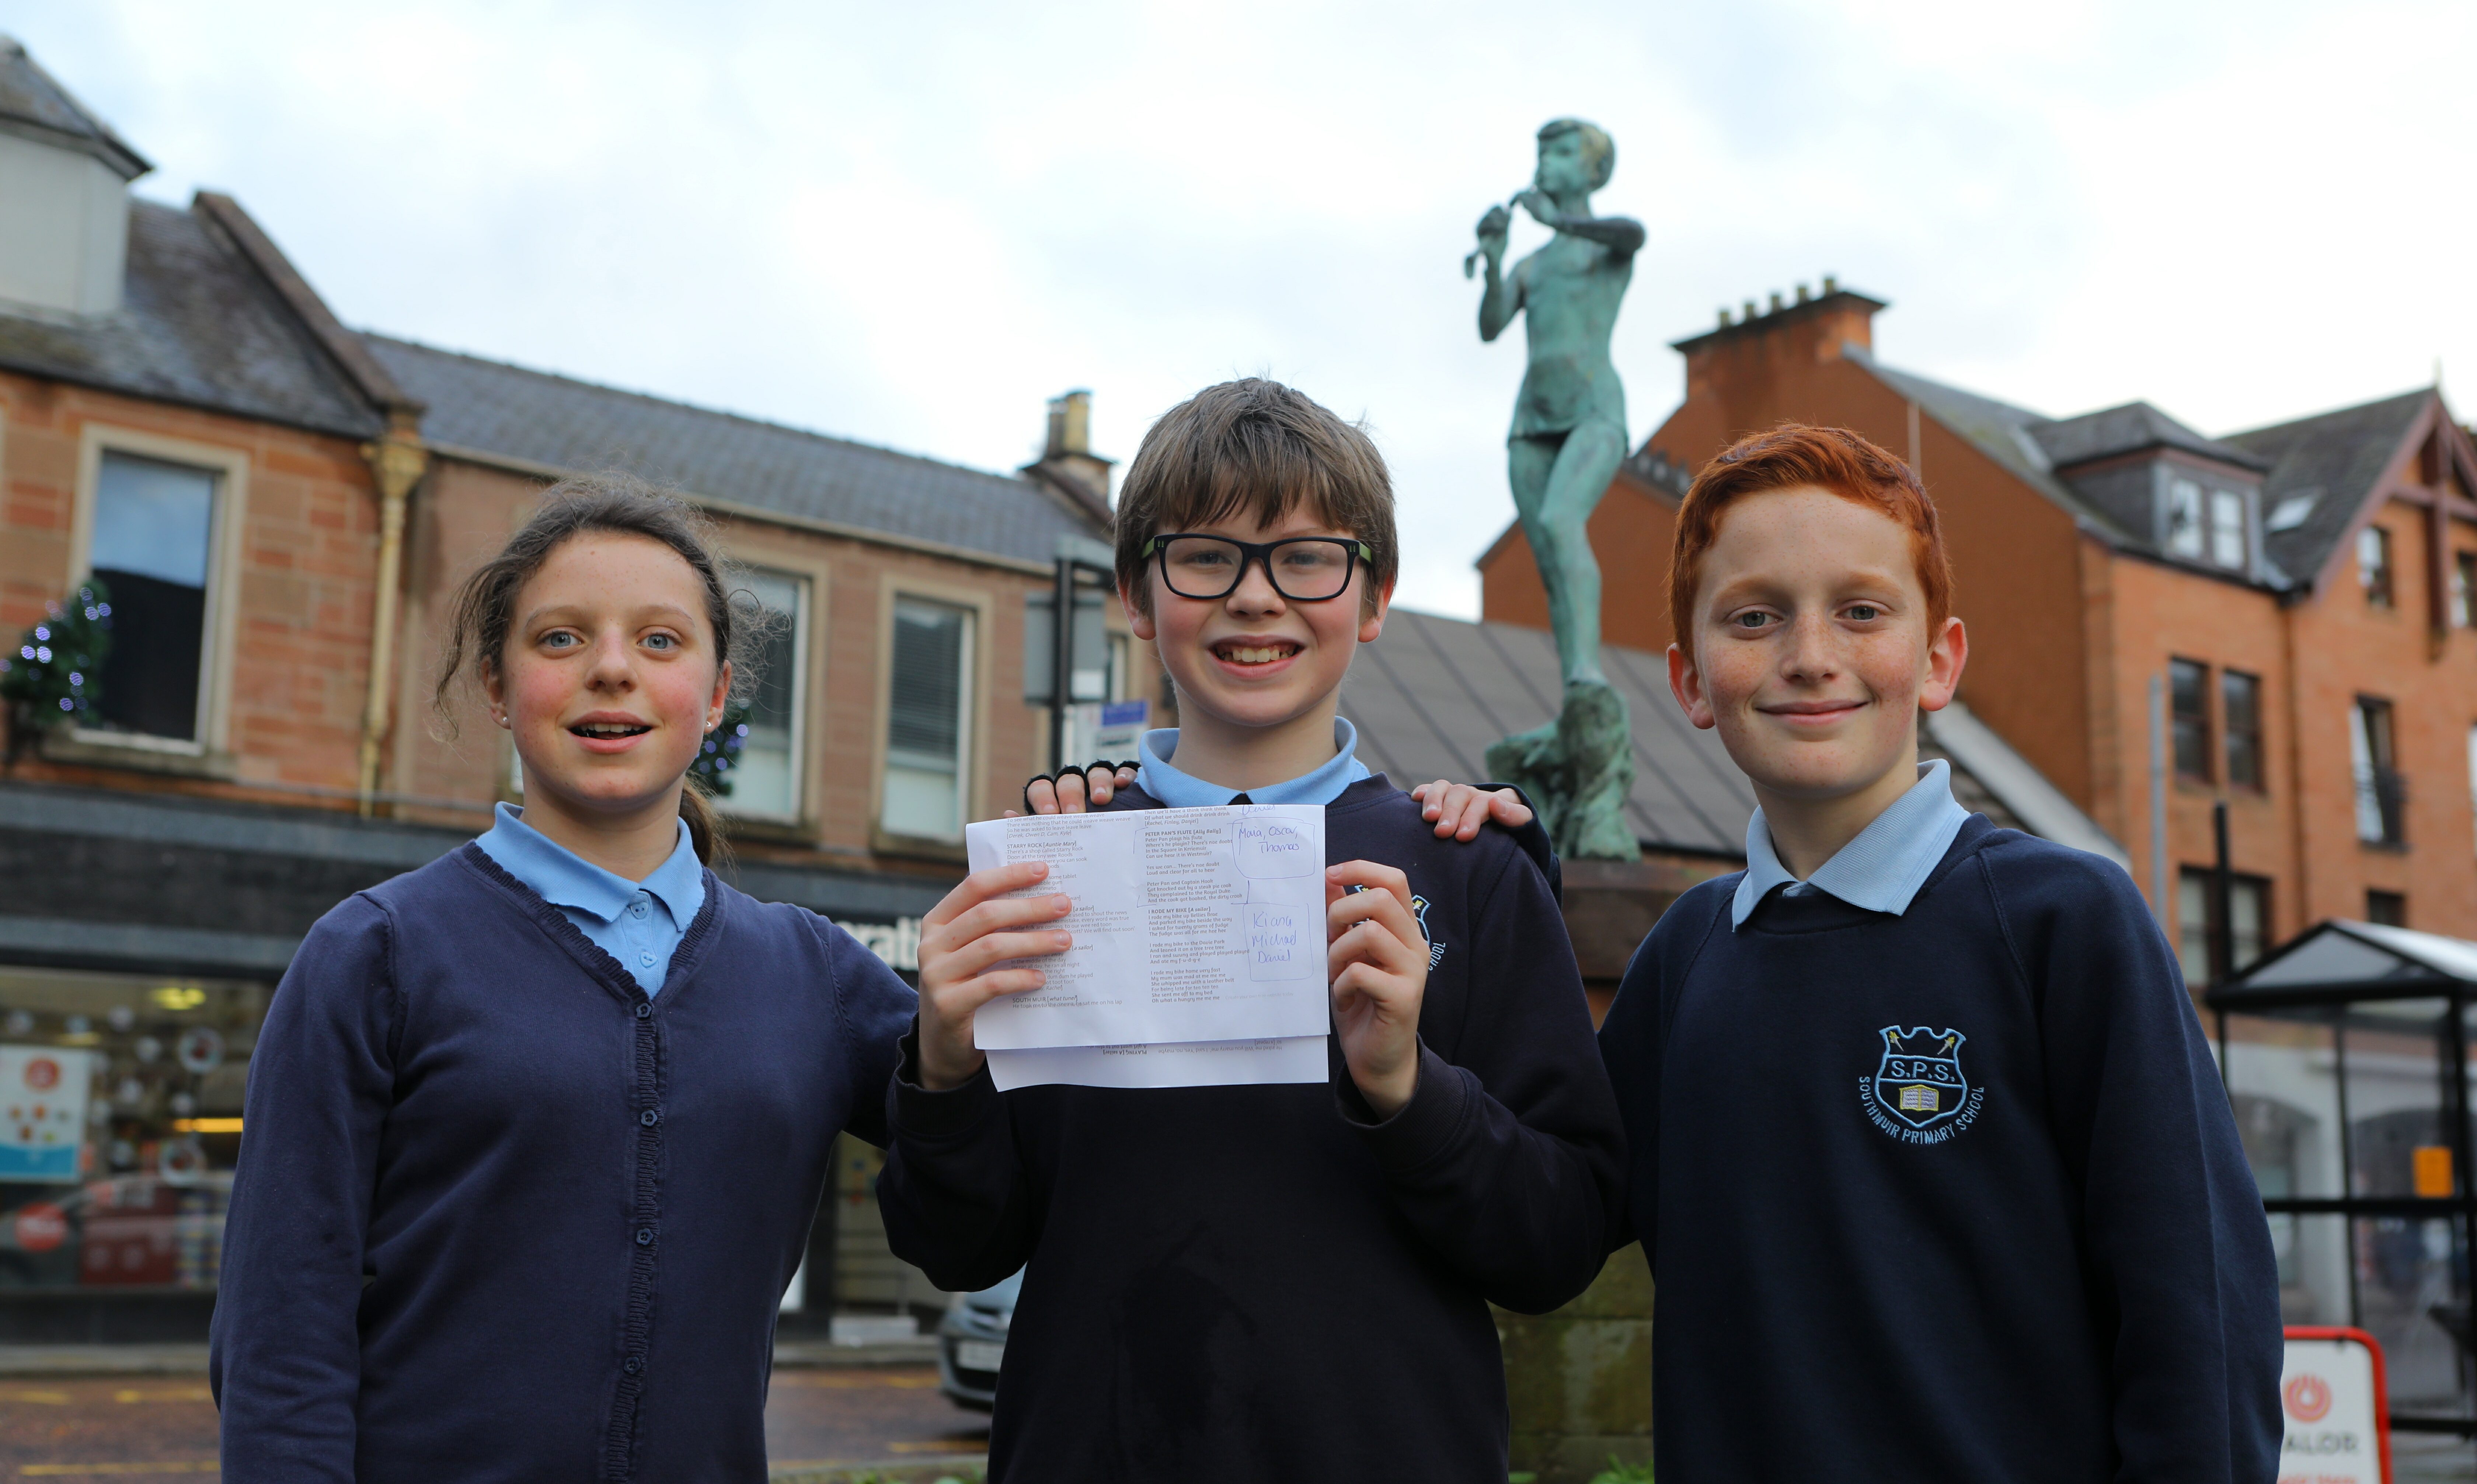 Beside the Peter Pan statue in Kirriemuir, Maia Valentine, Thomas Watson and Oscar Grey from Southmuir Primary School, who wrote a poem about Peter Pan.